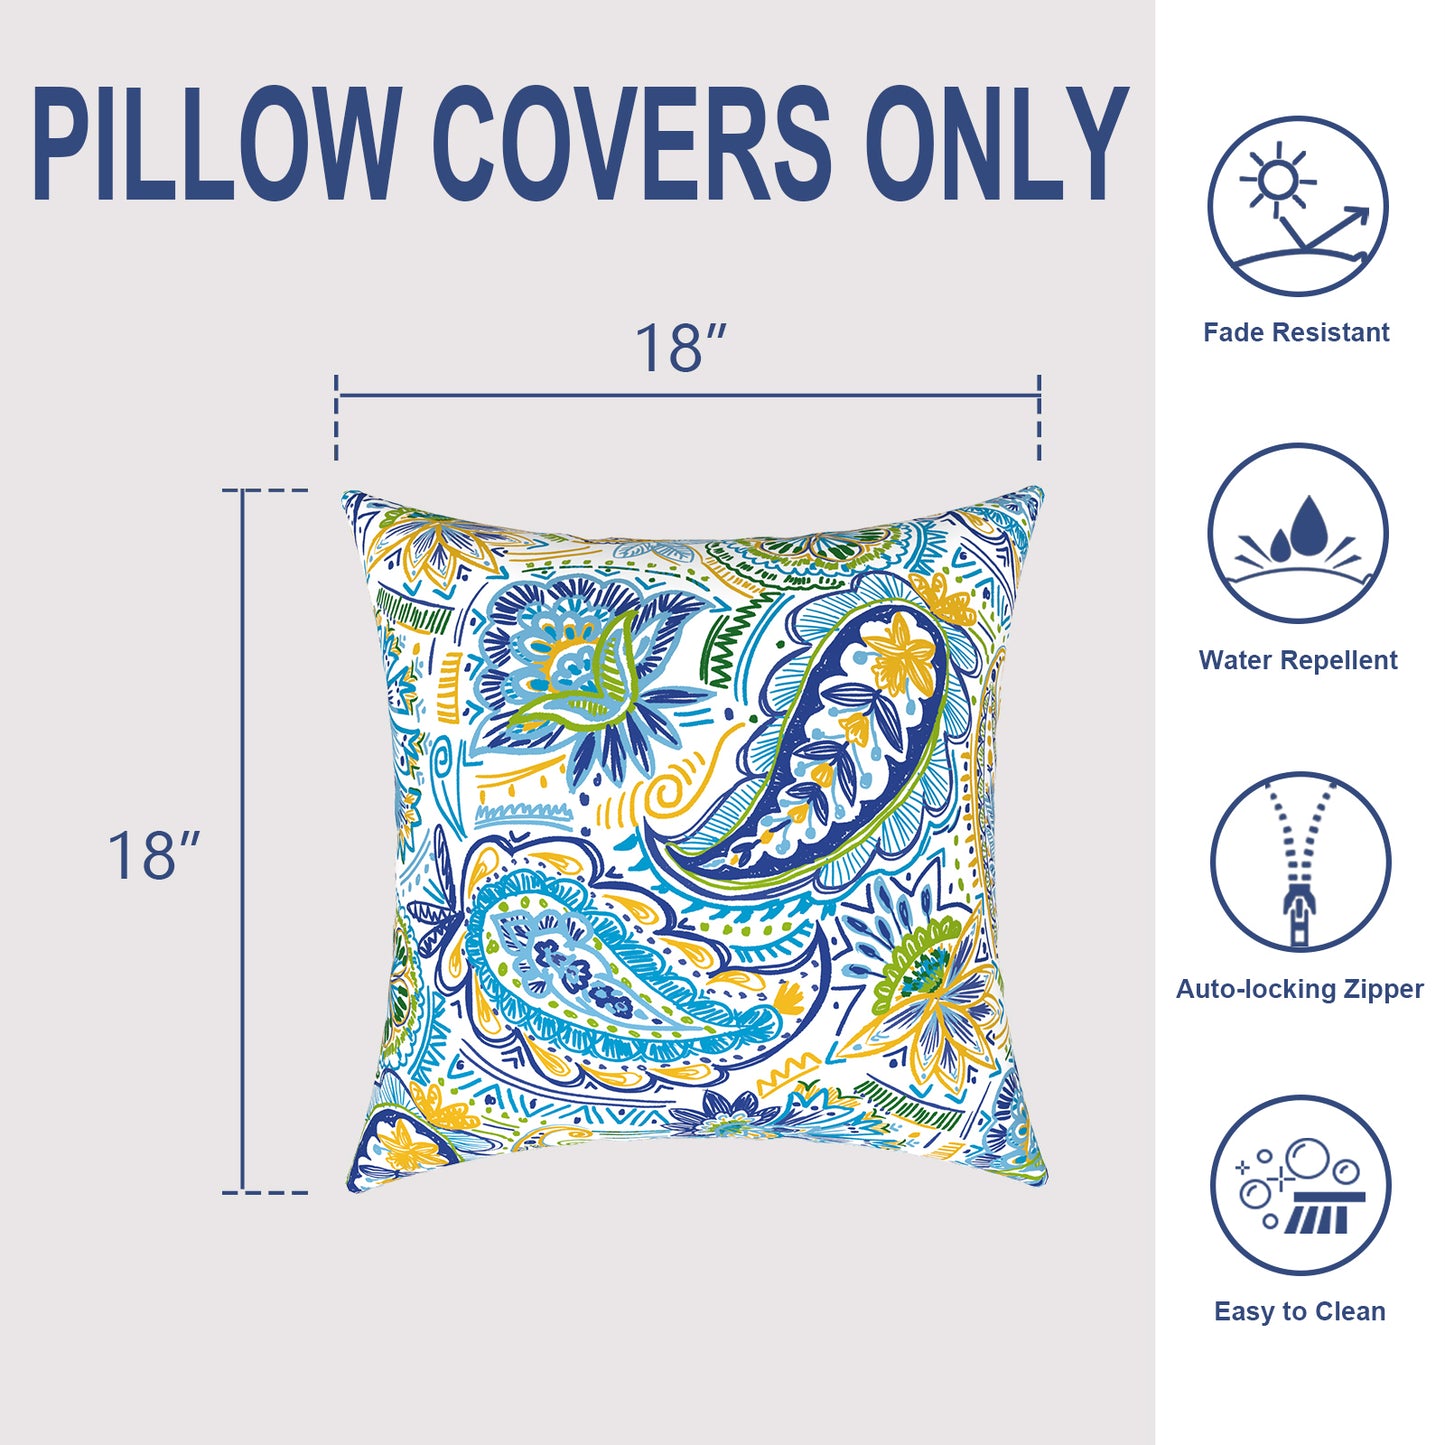 Melody Elephant Outdoor Throw Pillow Covers Pack of 2, Decorative Water Repellent Square Pillow Cases 18x18 Inch, Patio Pillowcases for Home Patio Furniture Use, Blue Paisley